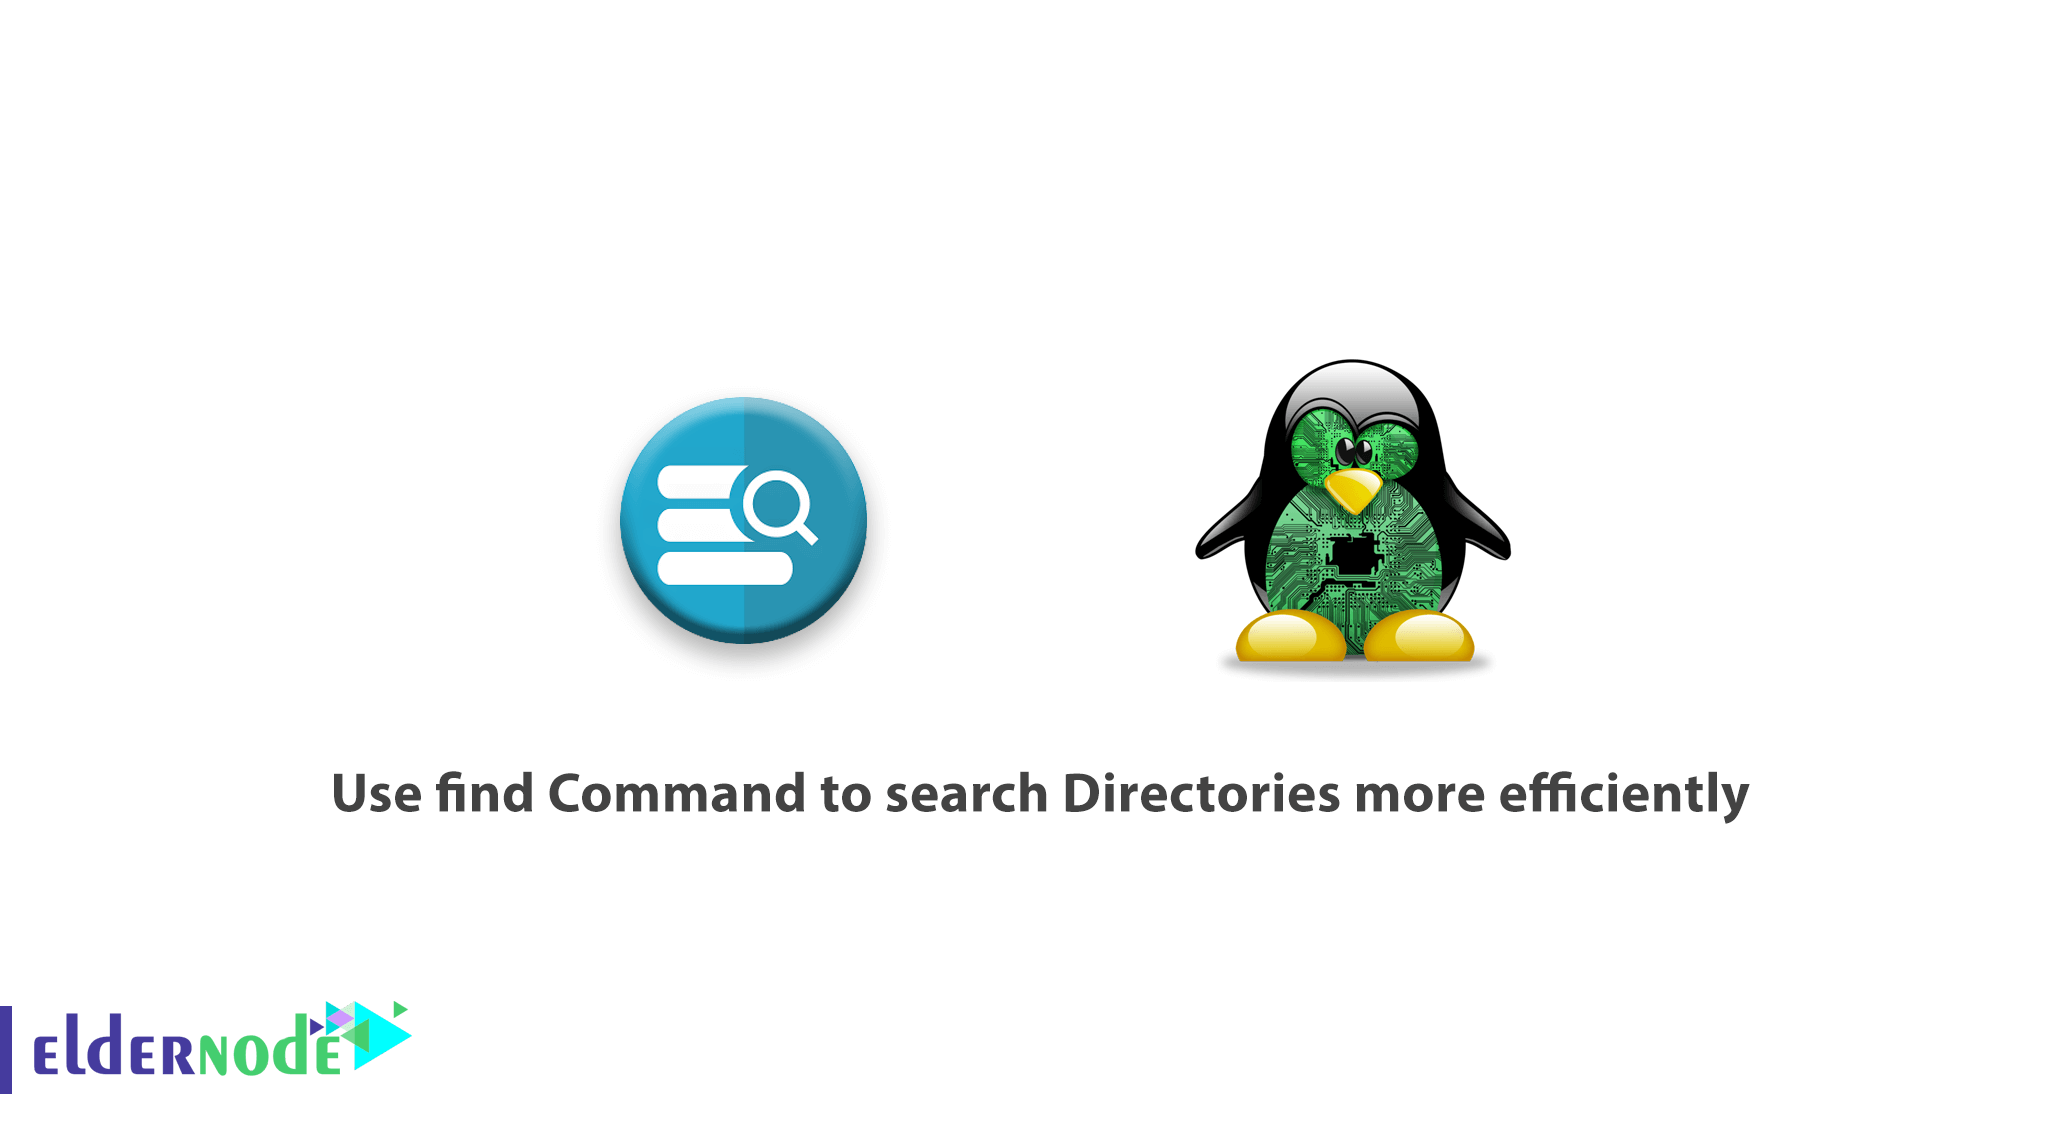 How to use find Command to search Directories more efficiently